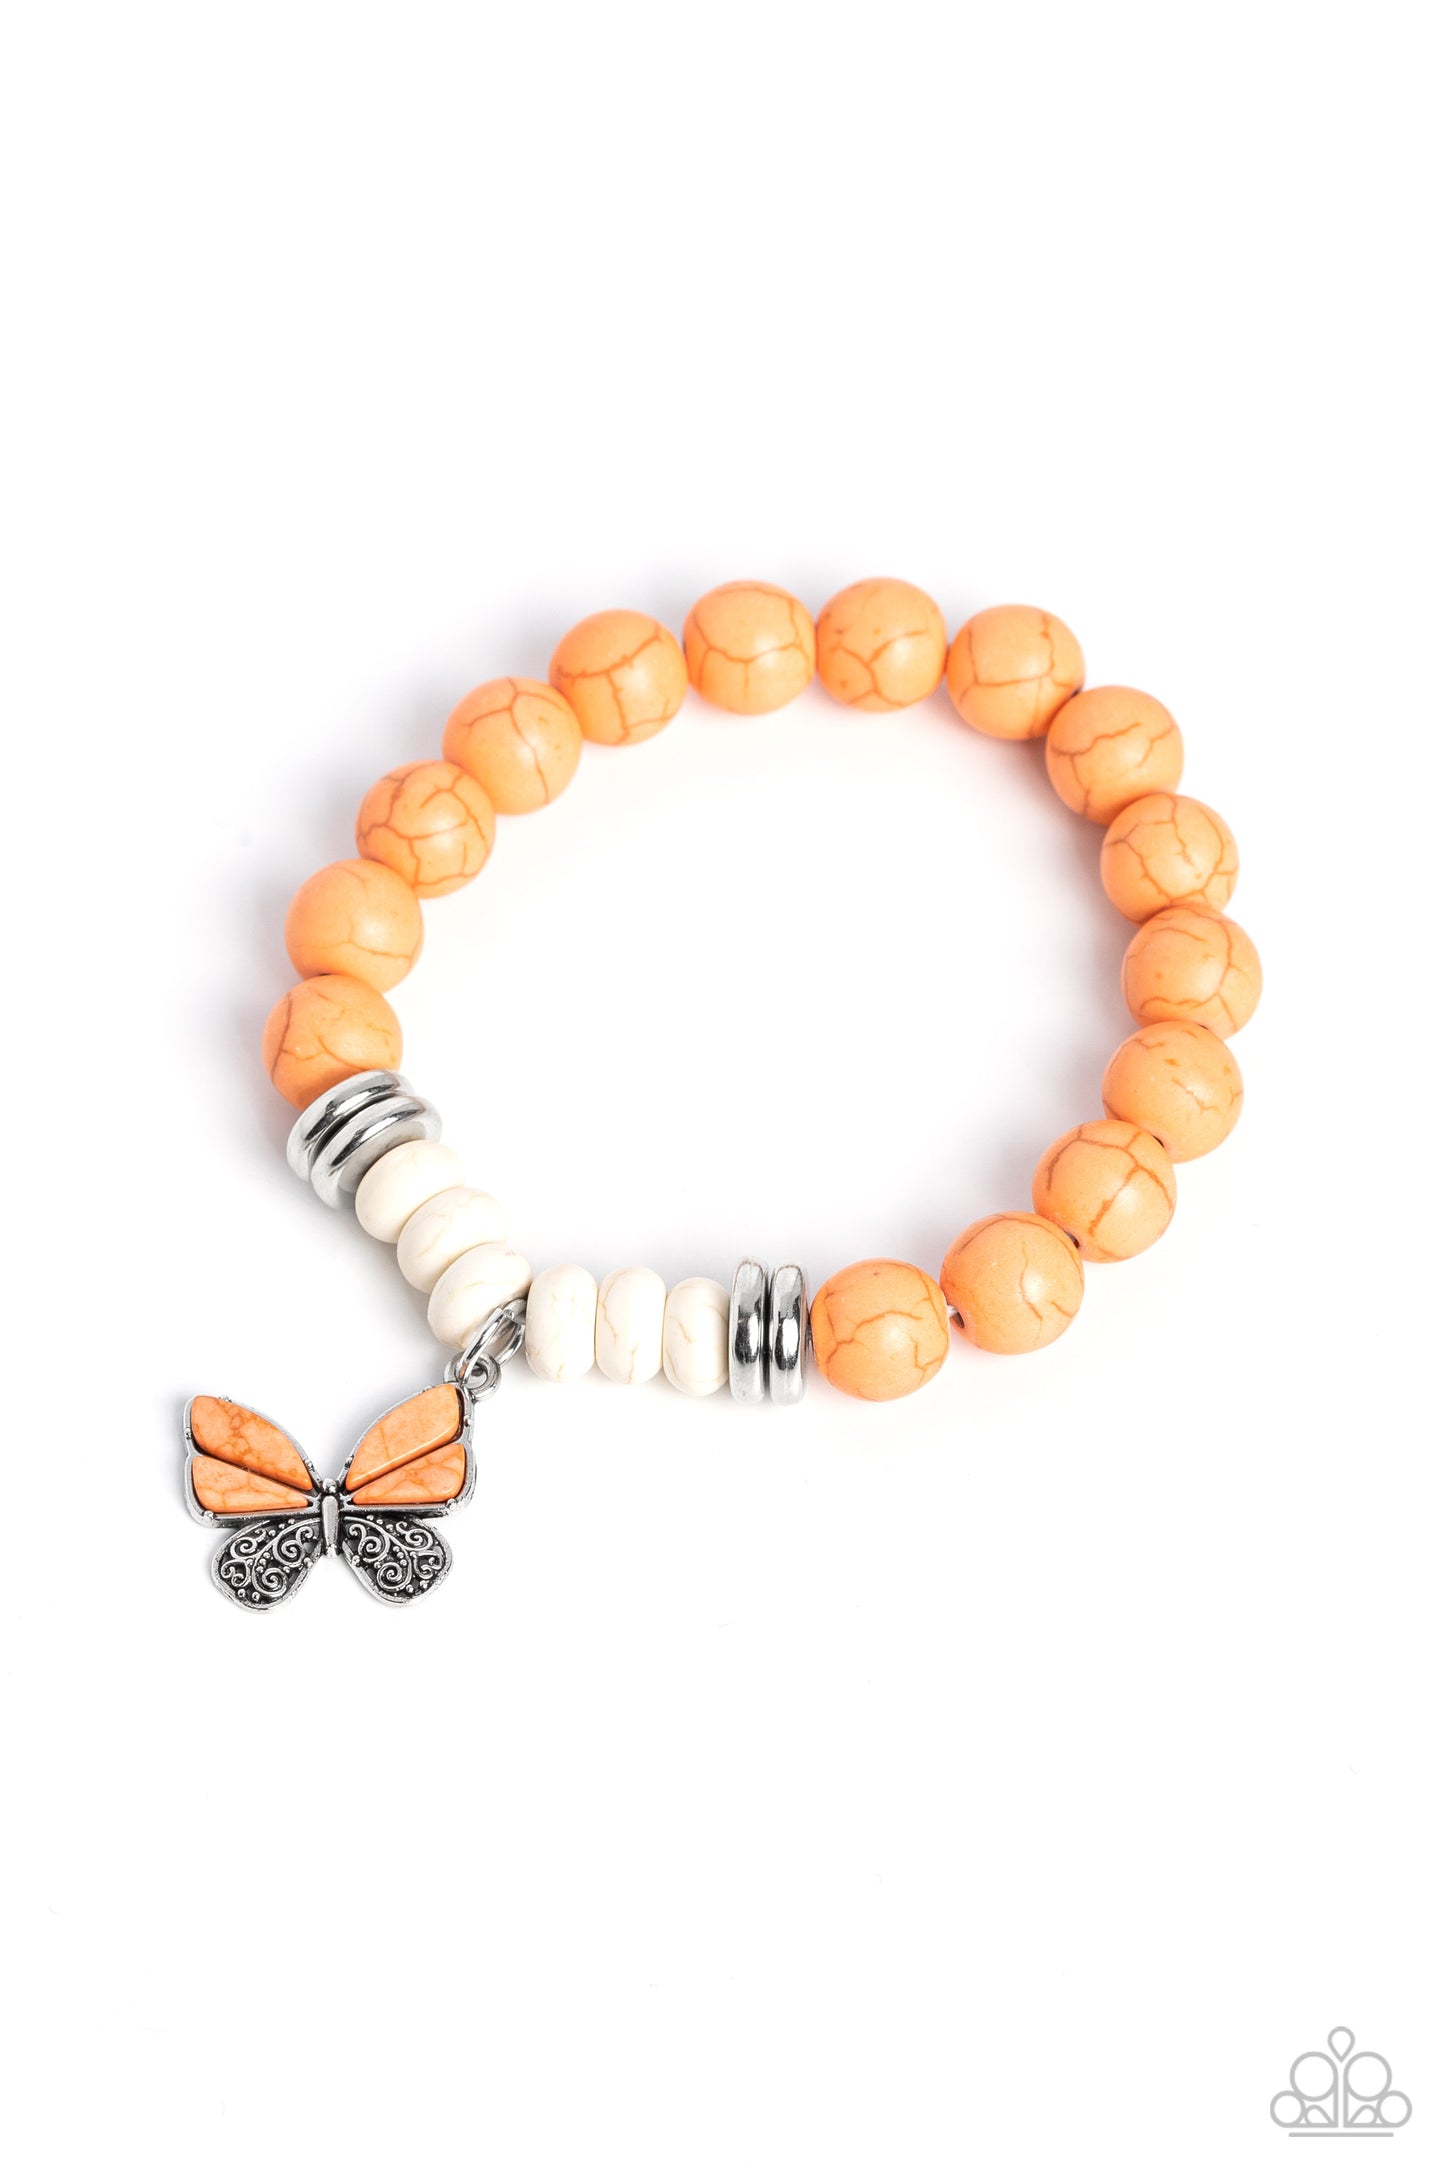 Bold Butterfly Orange Bracelet - Paparazzi Accessories  Polished orange and white stone beads are threaded along a stretchy band, with a sprinkle of metallic accents. A butterfly charm, featuring orange stone beads and swirls of silver filigree, swings from the design in a whimsical finish.  Sold as one individual bracelet.  P9SE-OGXX-203XX